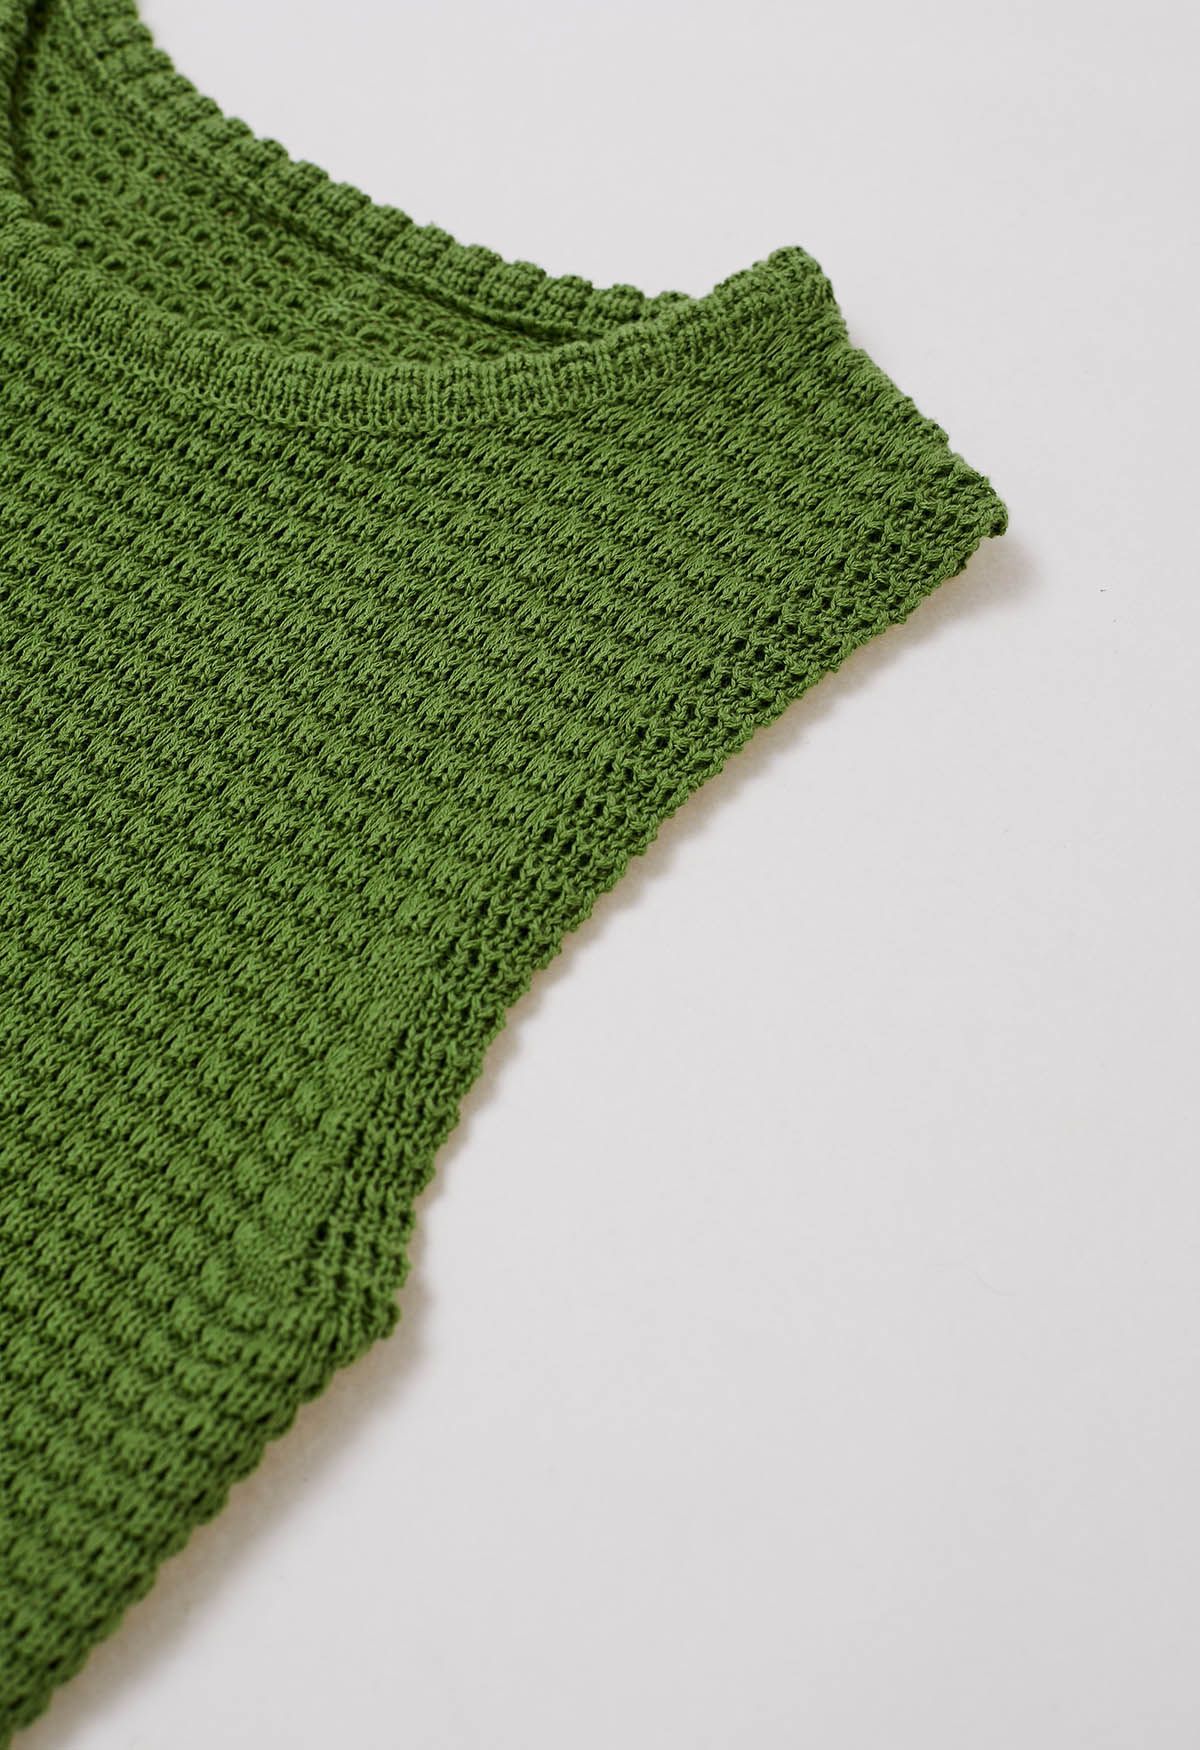 Solid Color Openwork Knit Sleeveless Top in Green